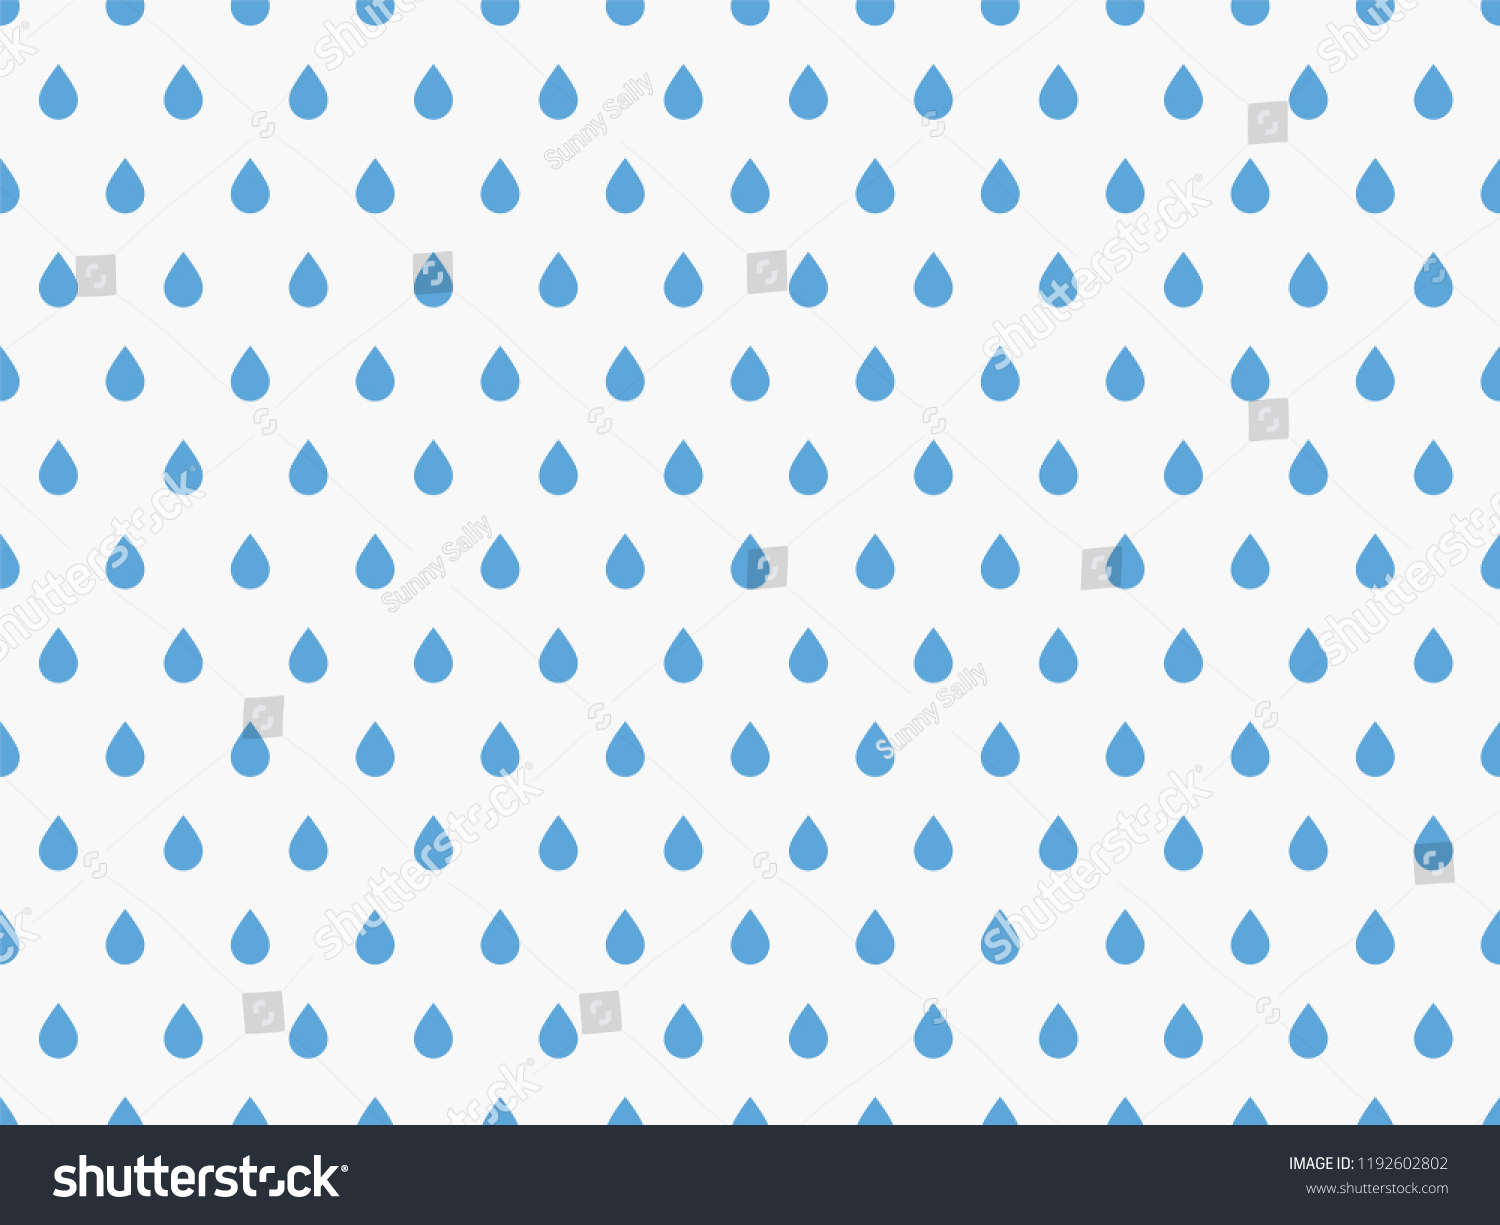 Drops Pattern Endless Background Seamless Stock Vector (Royalty Free ...